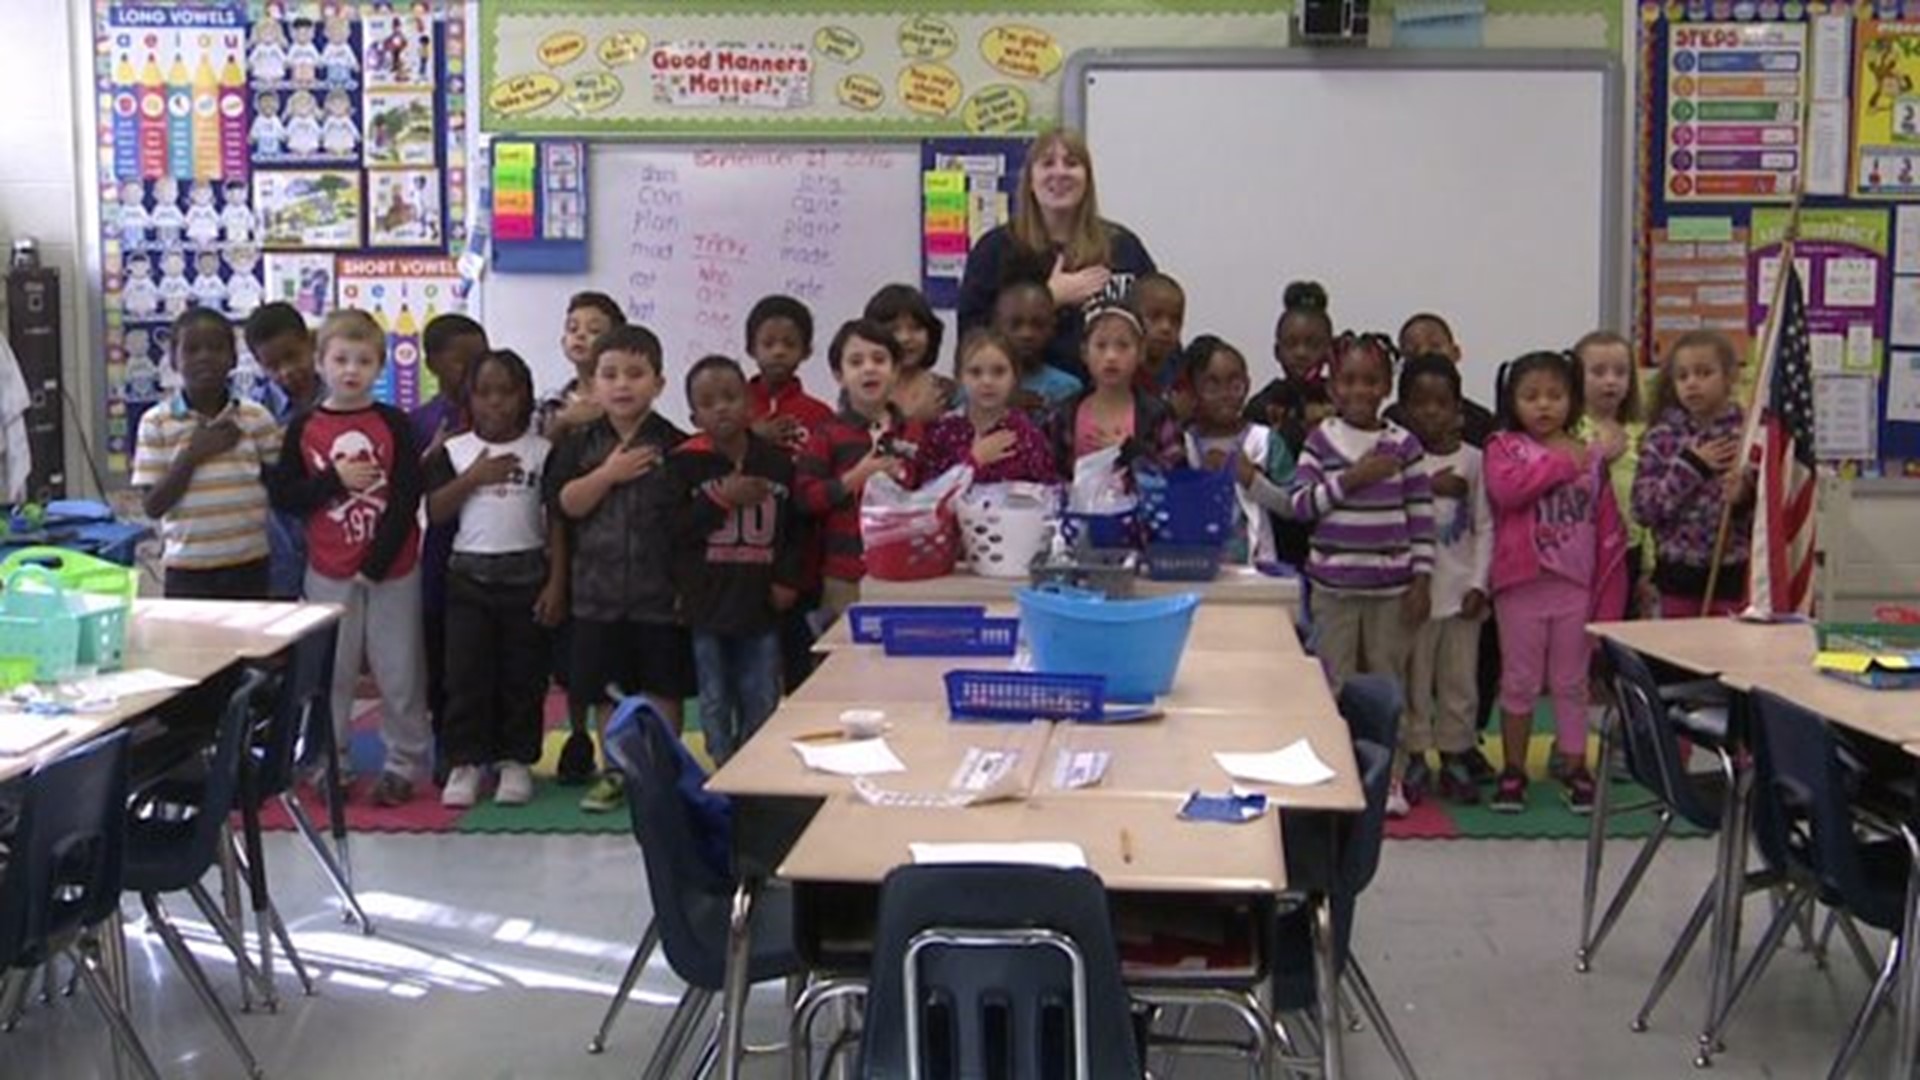 The Pledge from Mrs. Meyer`s class